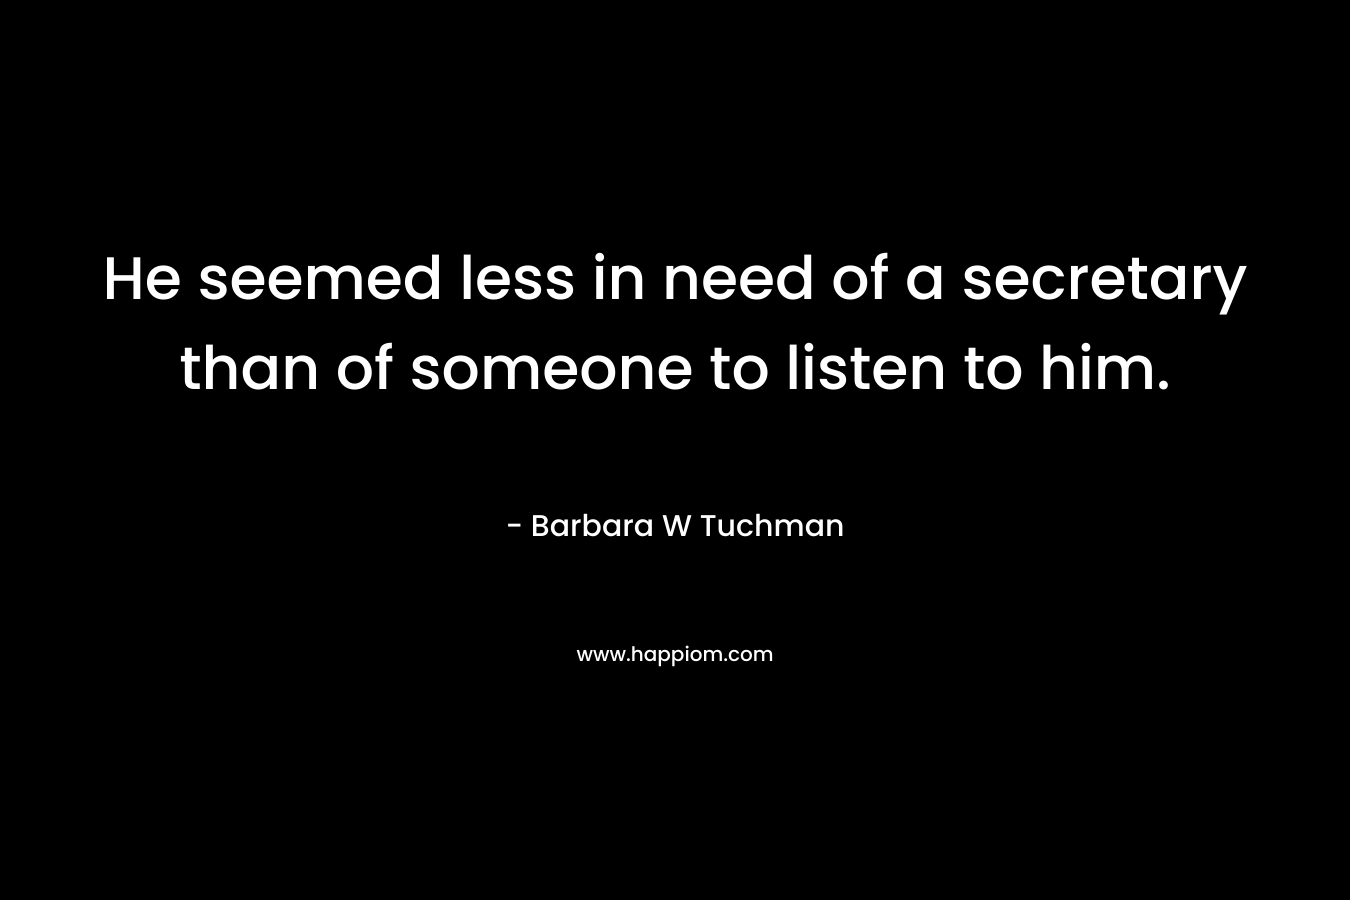 He seemed less in need of a secretary than of someone to listen to him. – Barbara W Tuchman